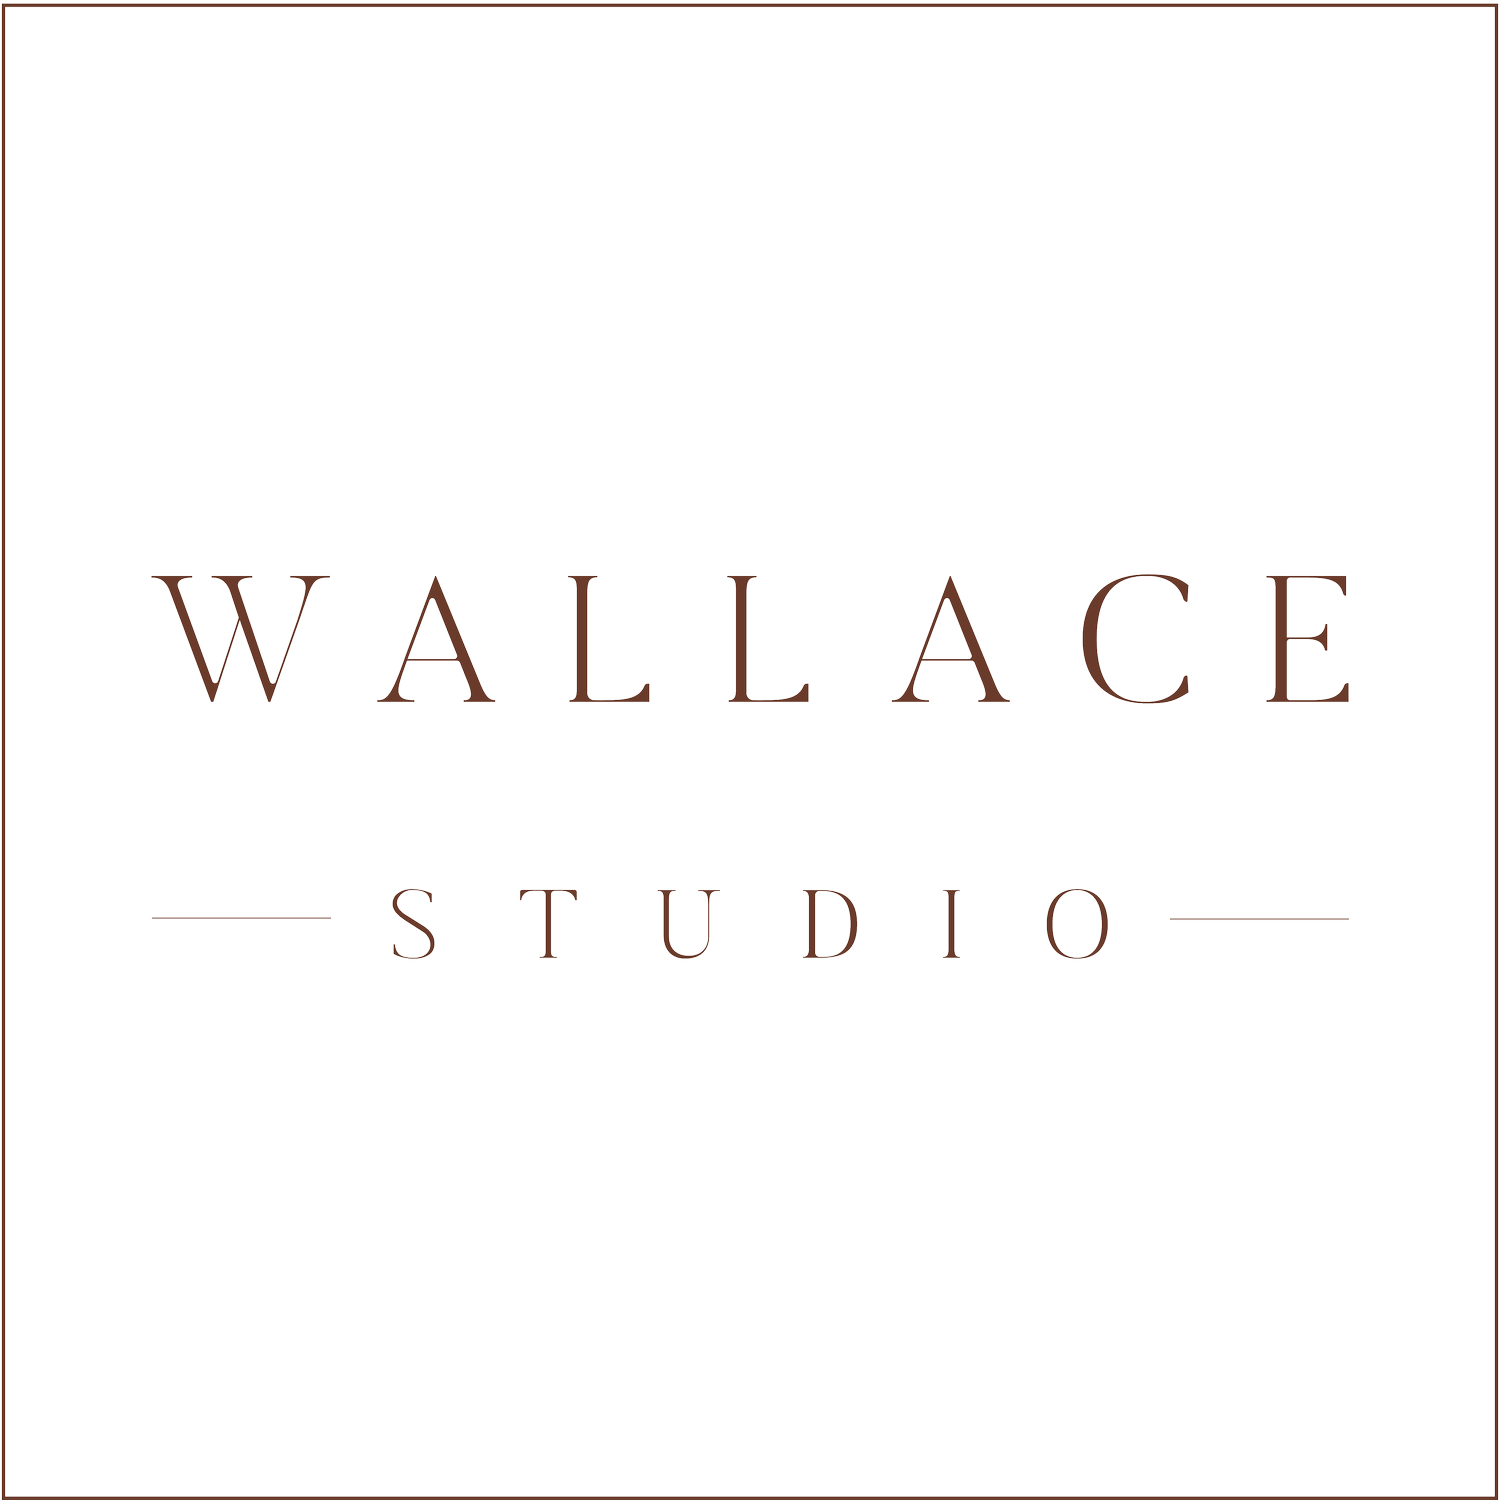 The Wallace Studio